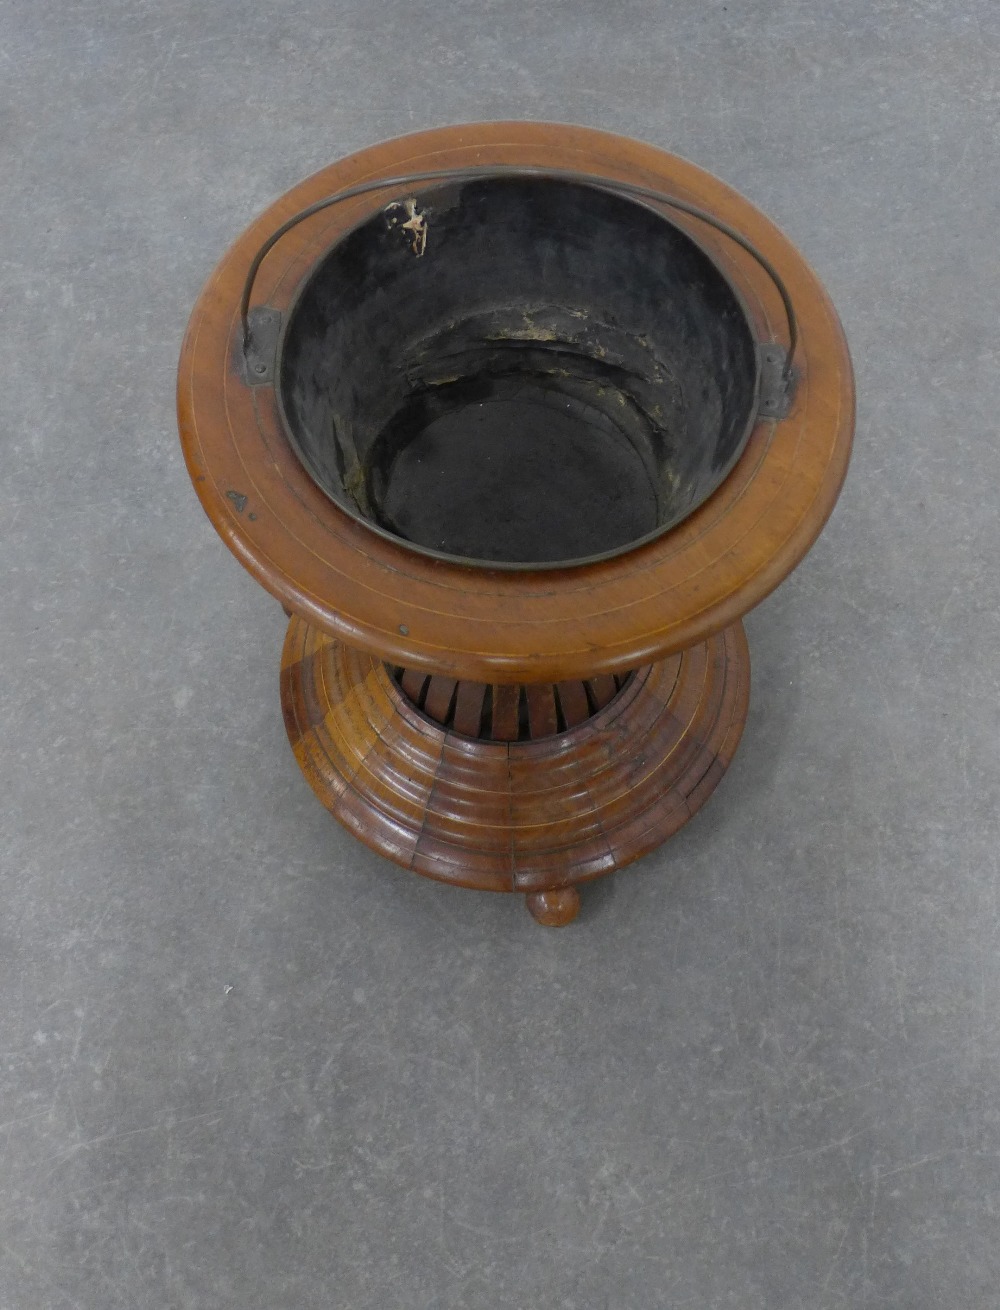 19th century mahogany peat / oyster bucket, hourglass form with metal liner and standing on bun - Image 2 of 2